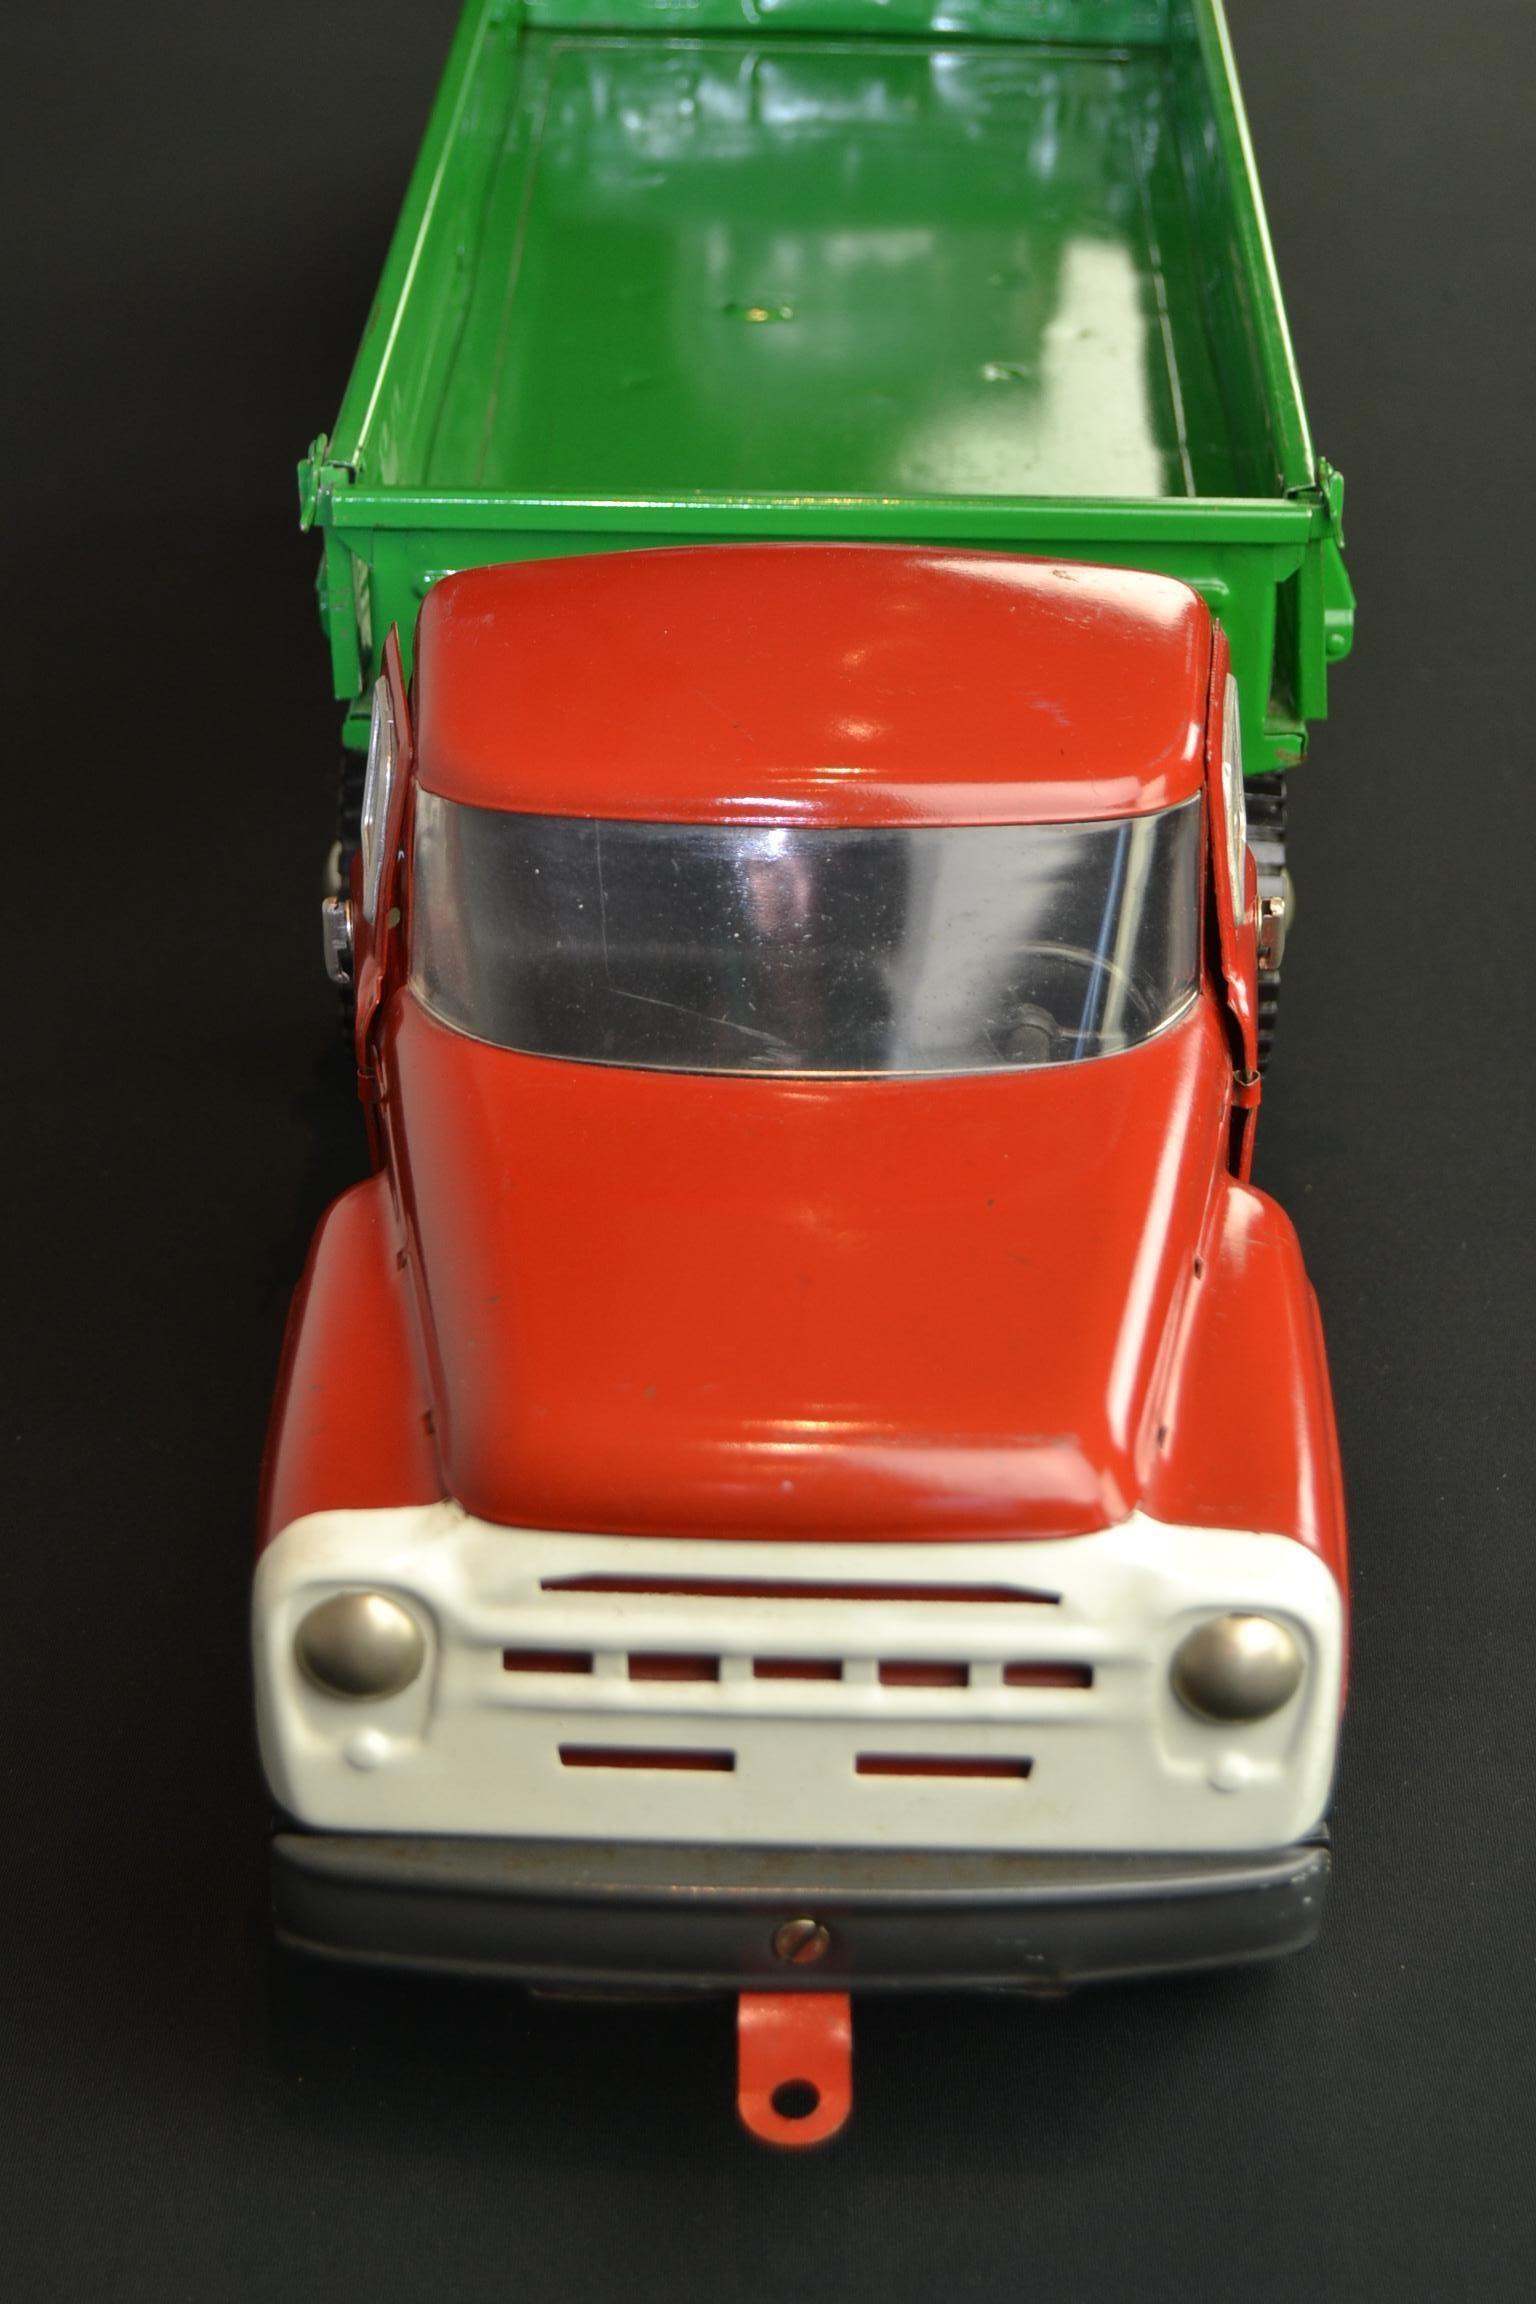 Vintage large semi-trailer truck toy. 
This large metal truck toy has a red cabin and a green trailer. The color and painting is still original. It was made in Russia in the 1990s, in 1994 which is given on the license plate. As well the flap at